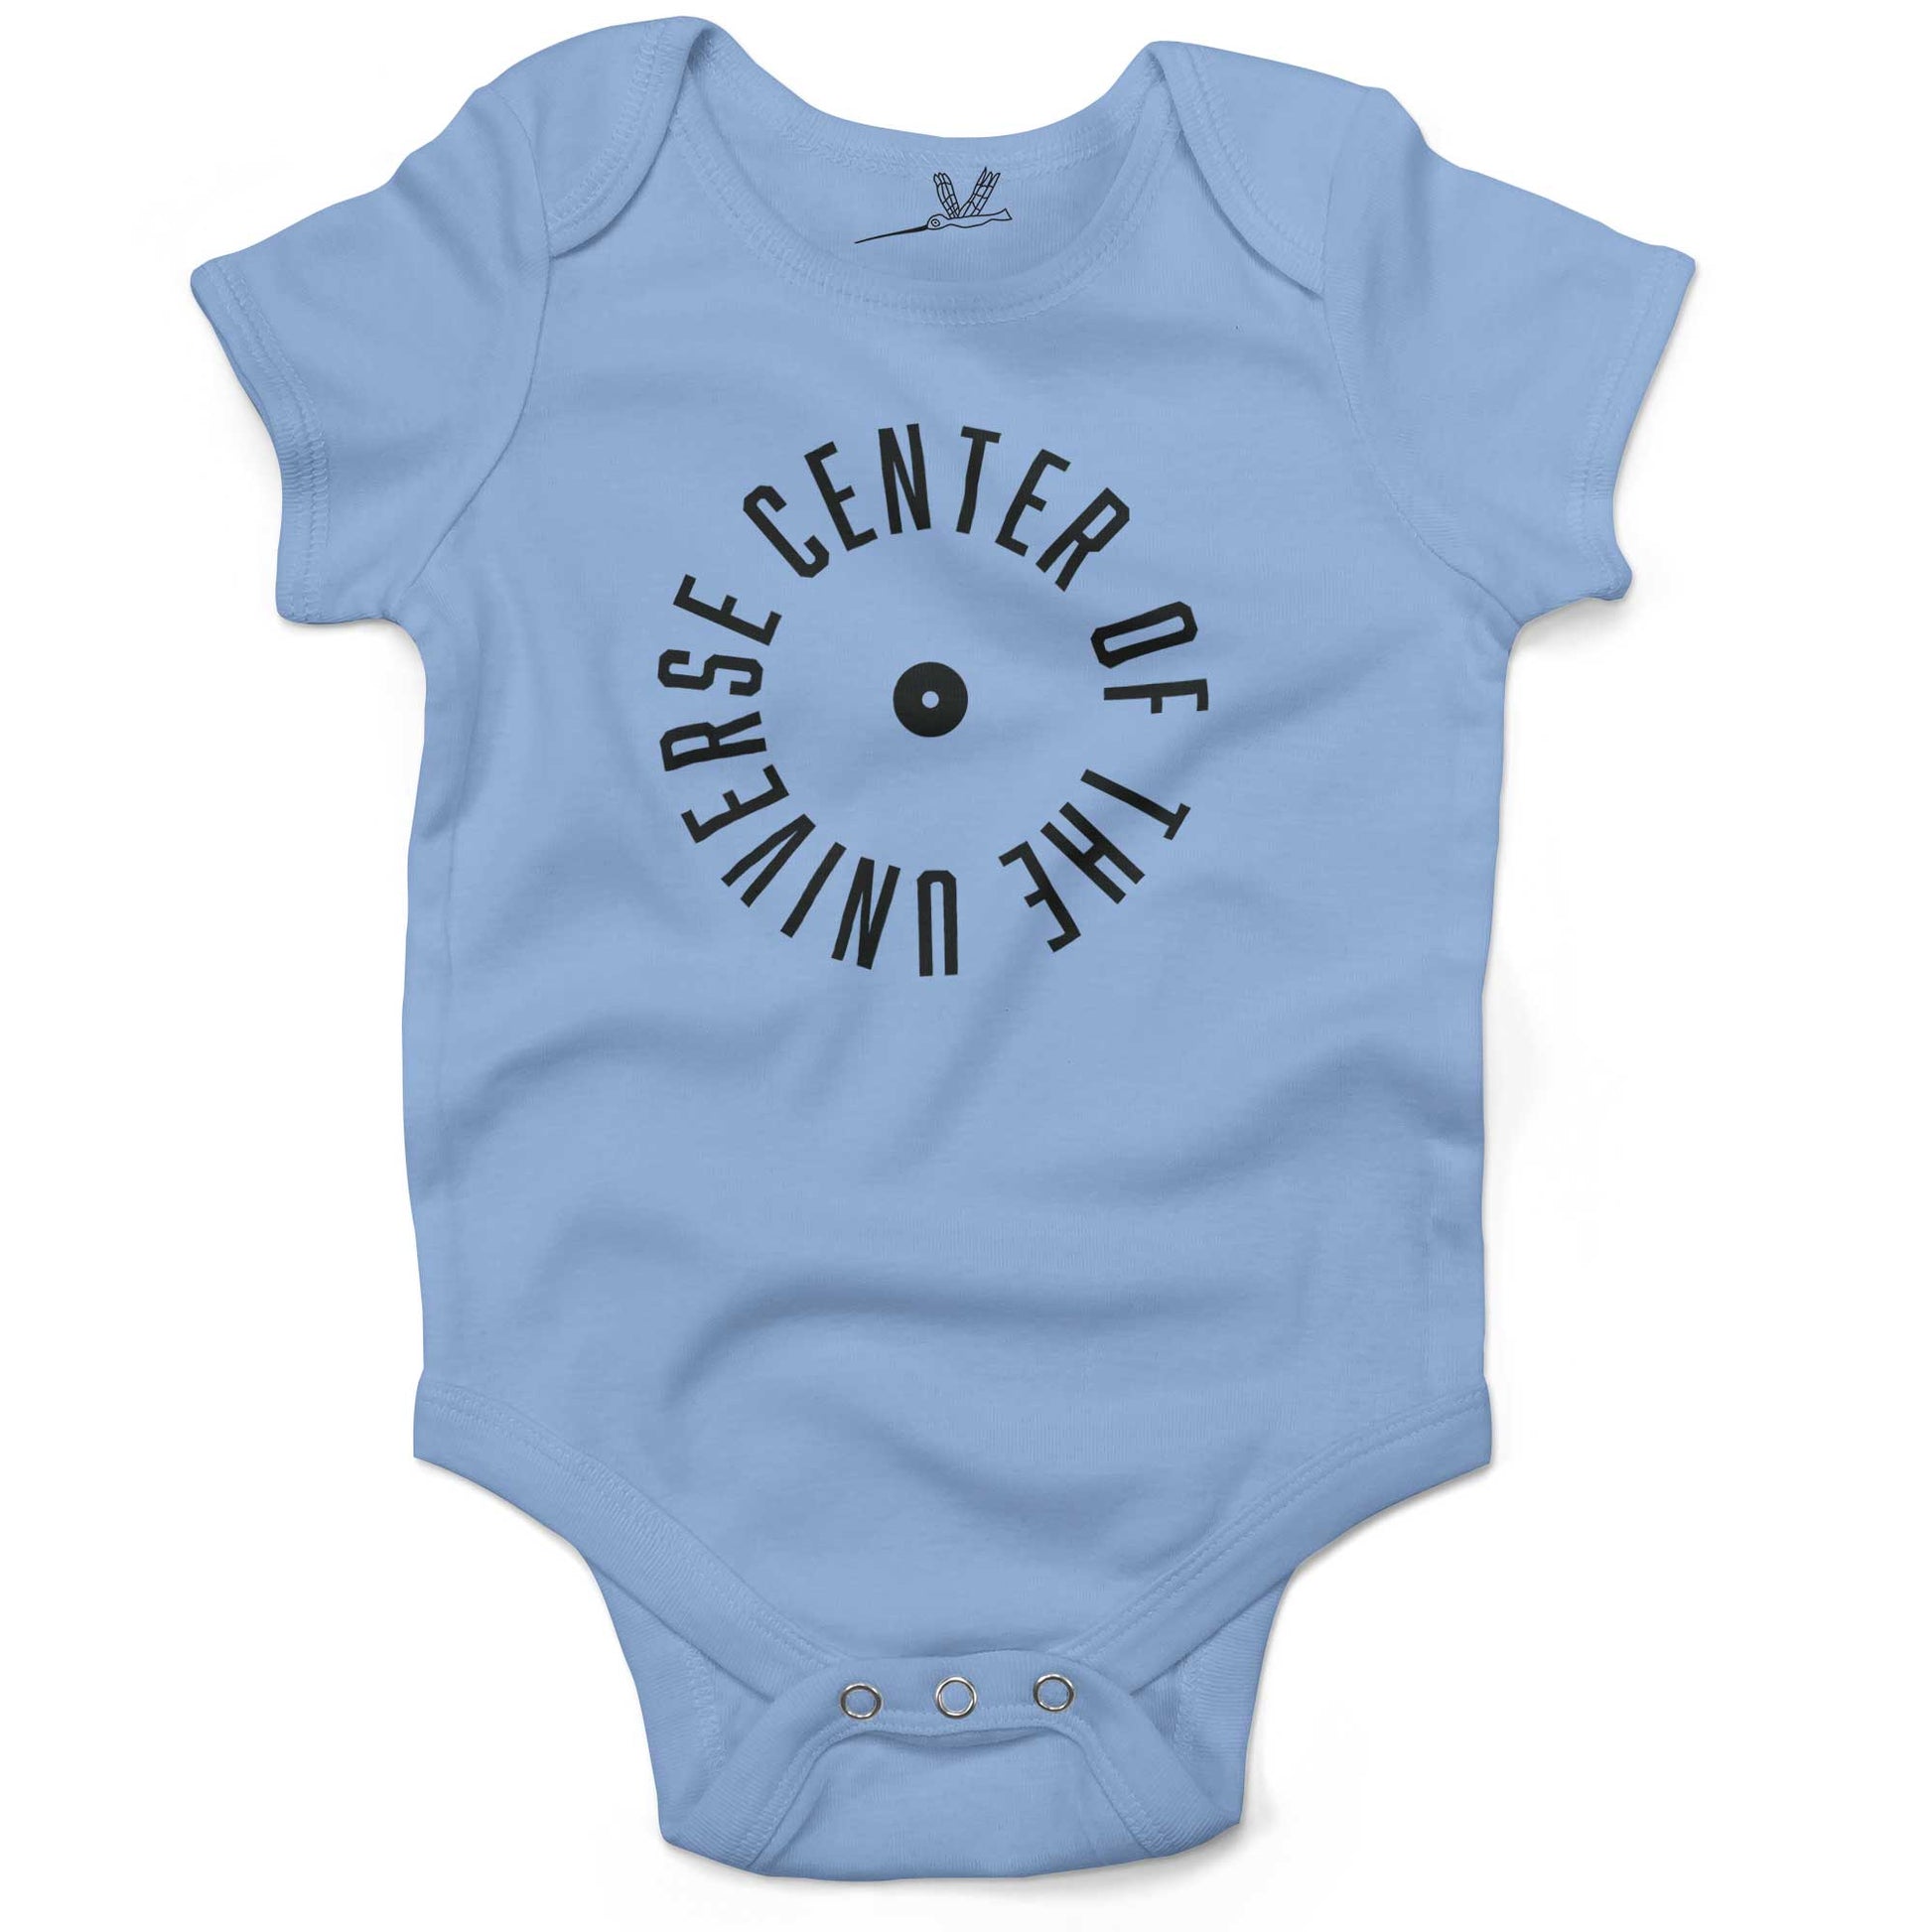 Center Of The Universe Baby One Piece or Raglan Tee-Organic Baby Blue-3-6 months